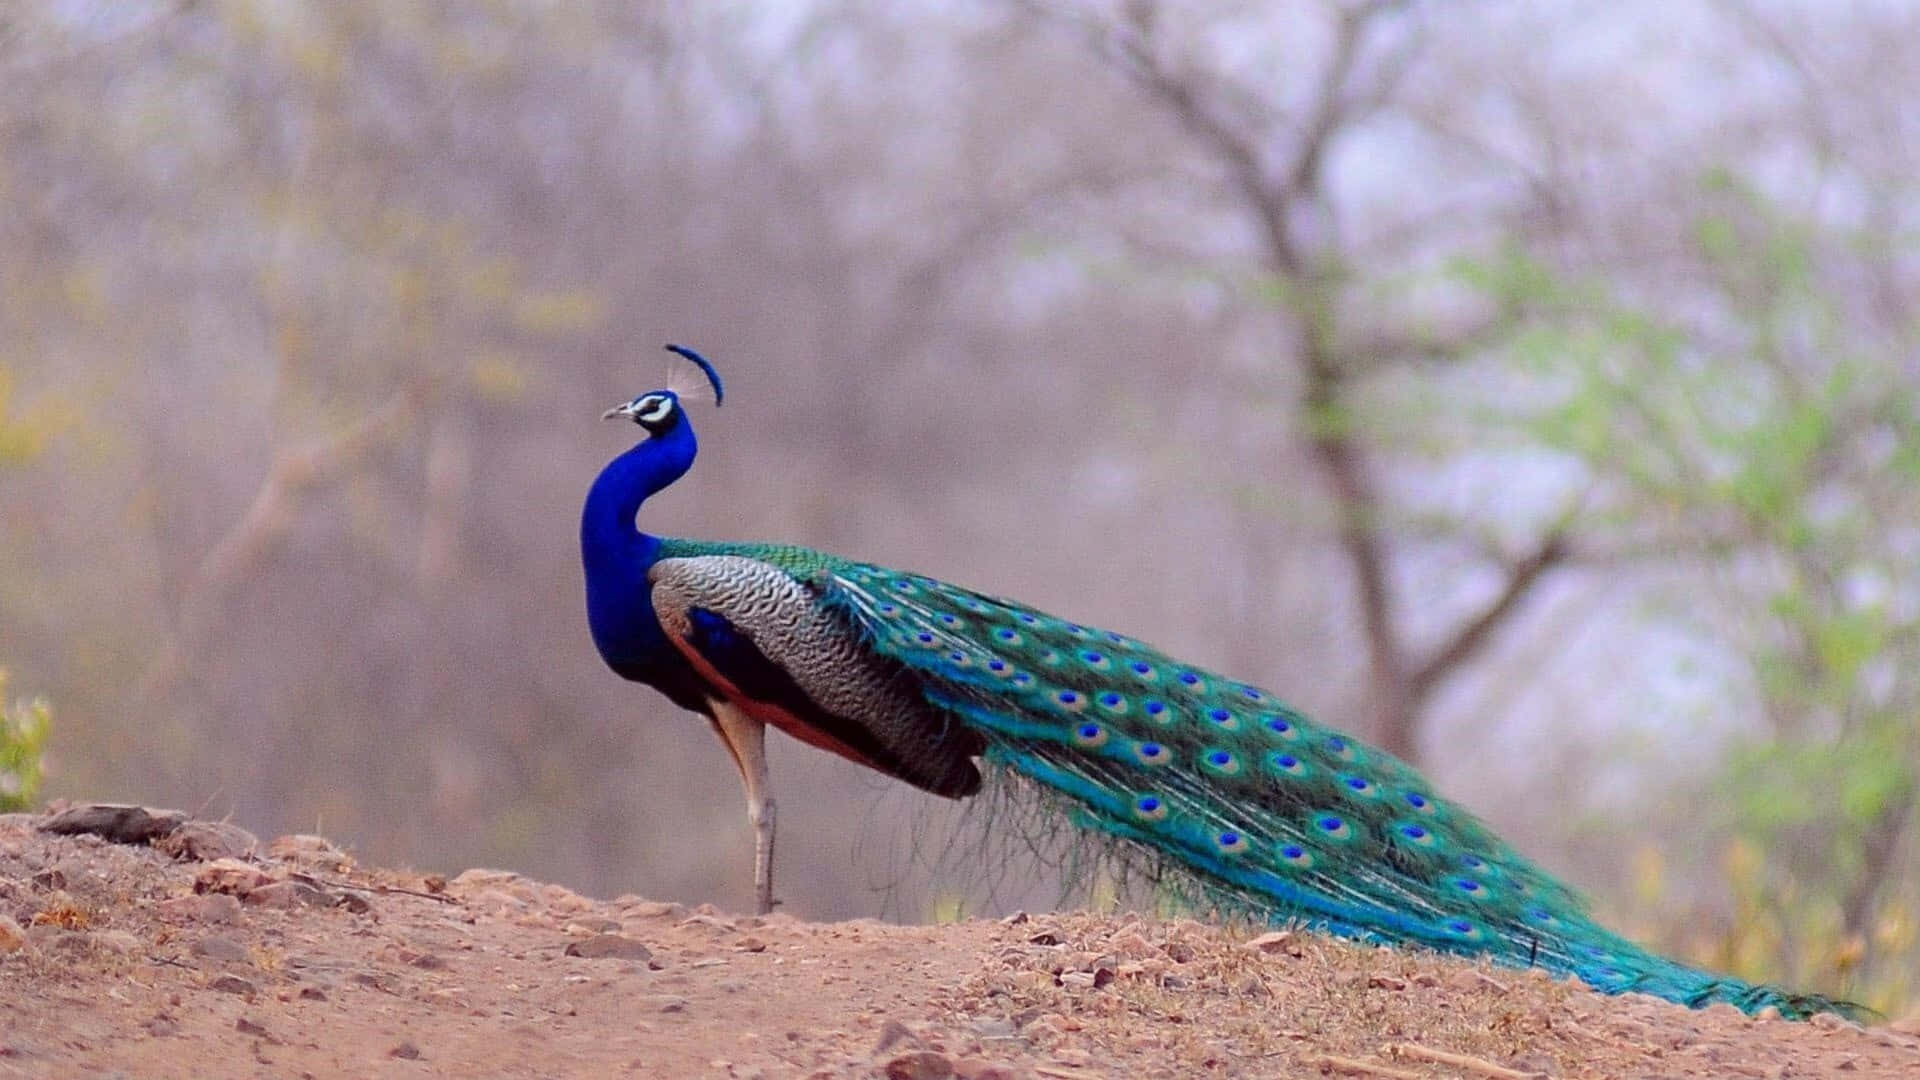 Peacock Standing On A Dirt Field